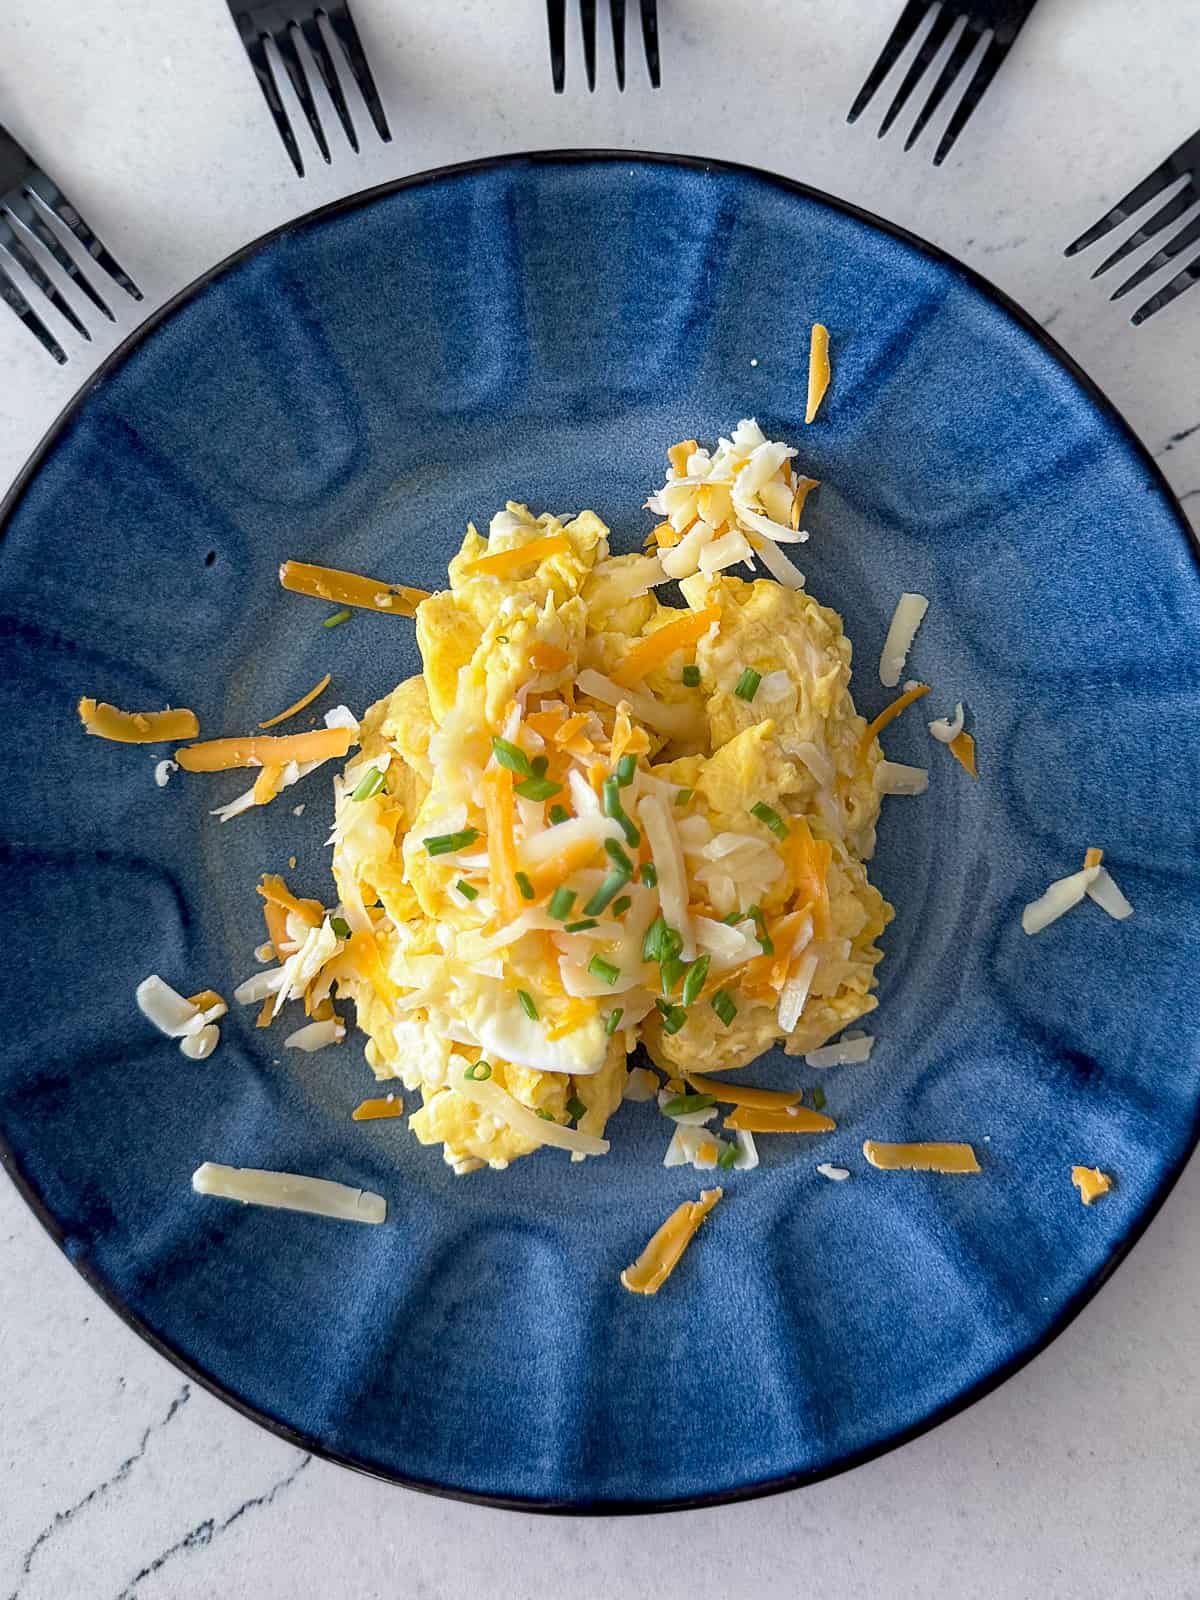 Scrambled Eggs made with Milk on a breakfast plate